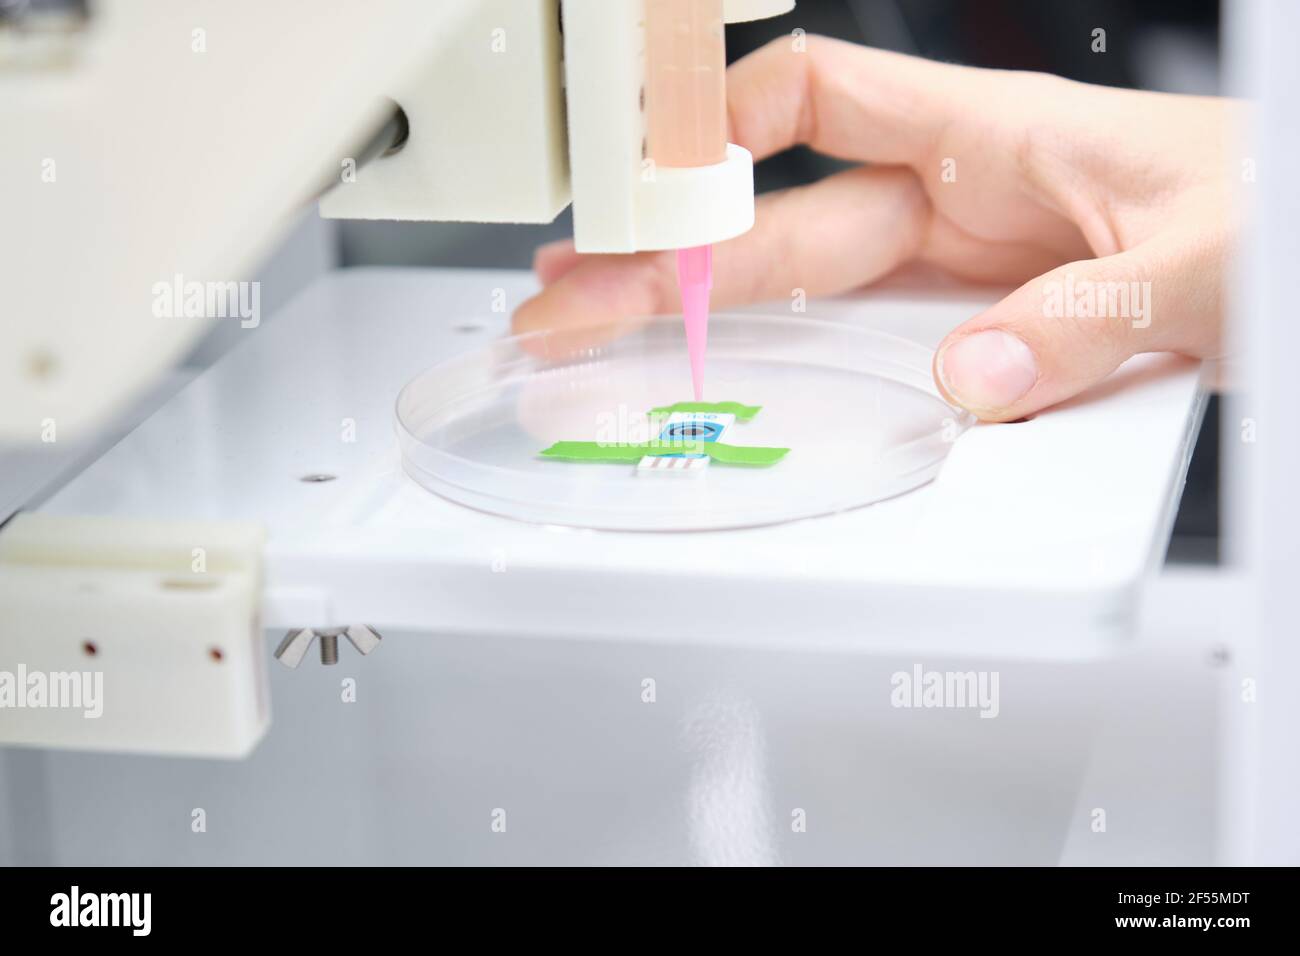 Researcher getting 3D bioprinter ready to 3D print cells onto an electrode. Biomaterials, tissue engineering concepts. Stock Photo